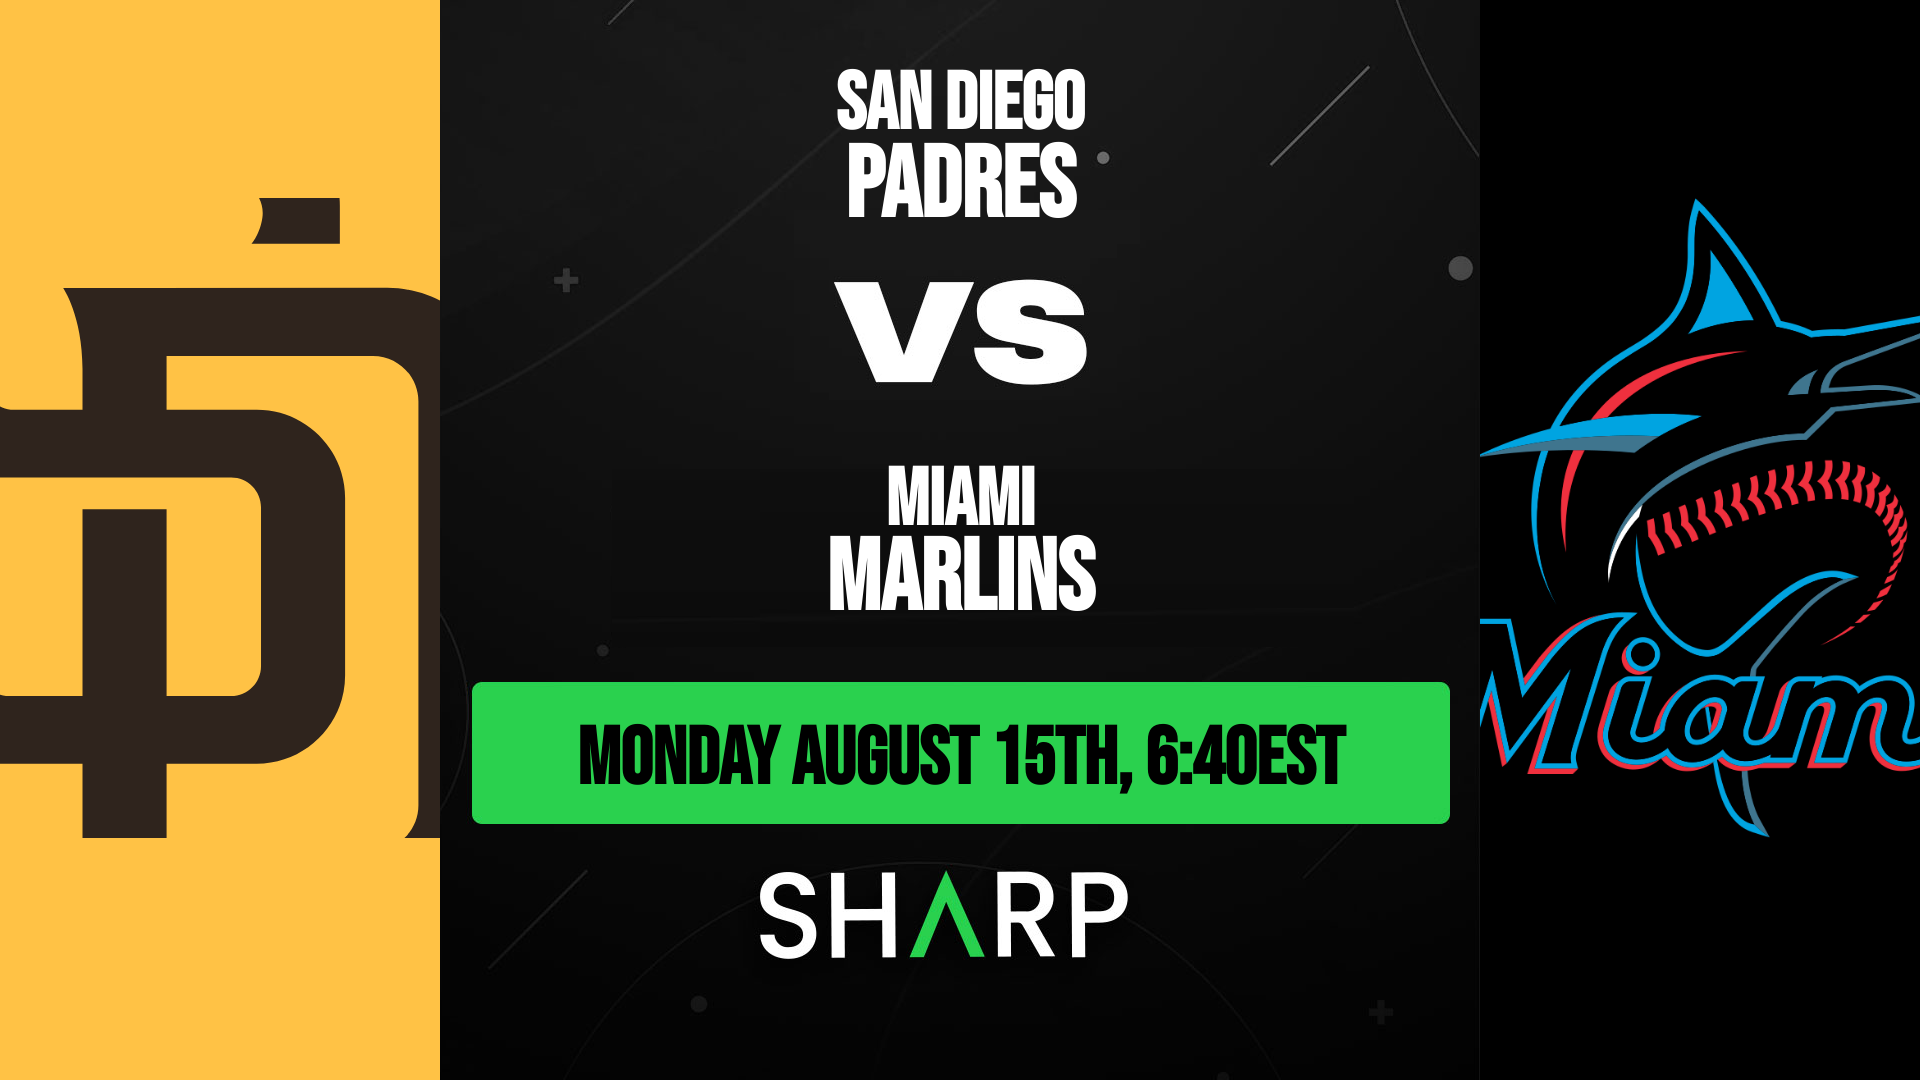 San Diego Padres @ Miami Marlins Matchup Preview - August 15th, 2022